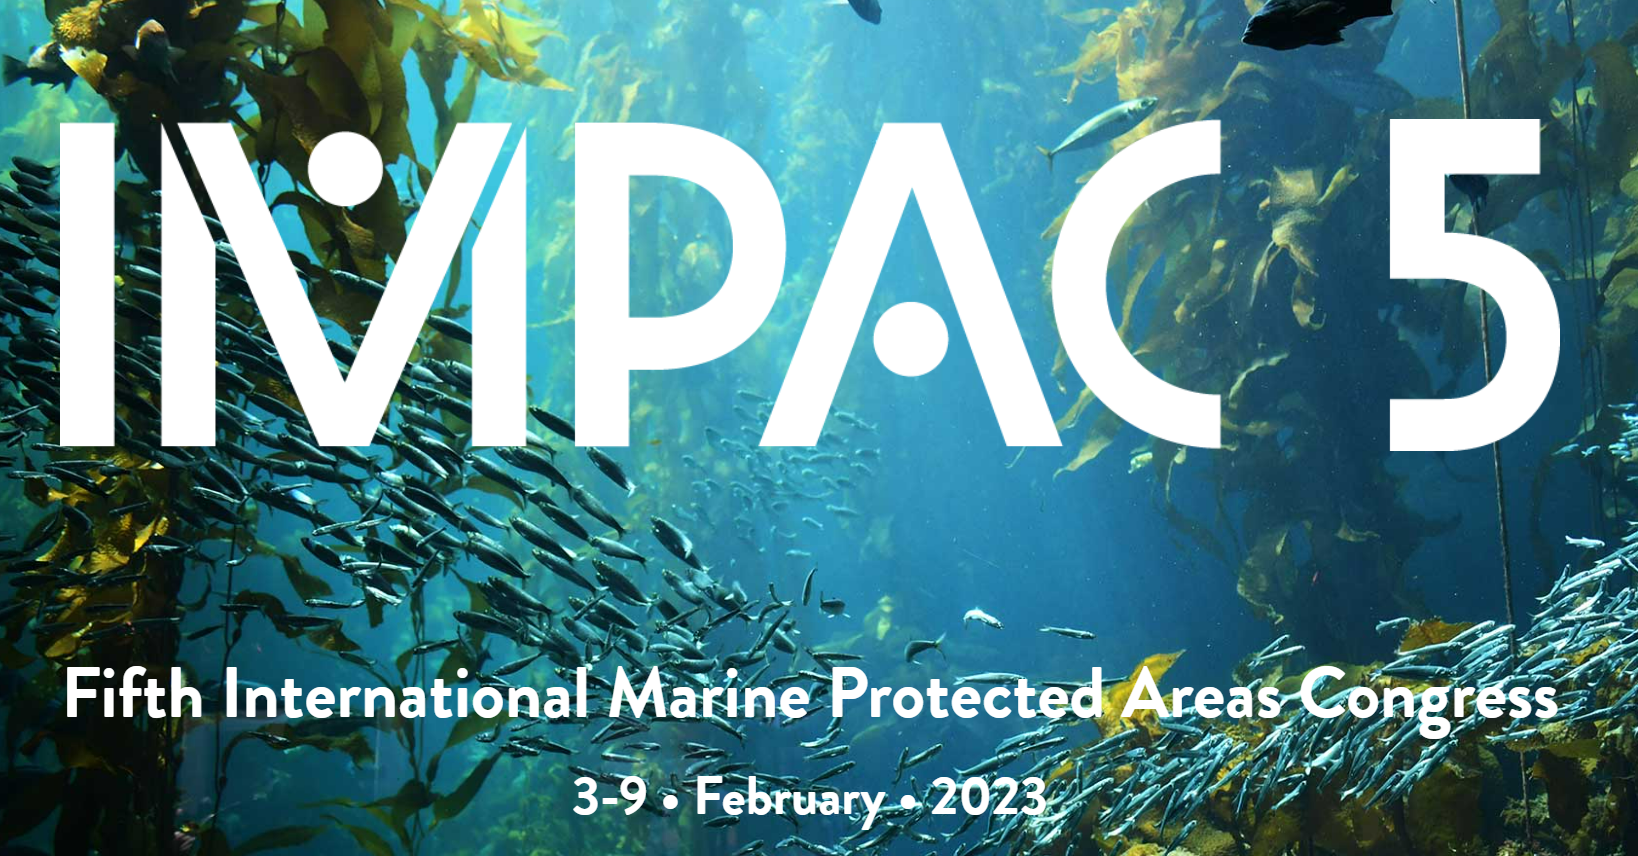 IMPAC5 banner with an underwater ocean background image featuring a kelp ecosystem with fishes swimming. Under IMPAC5 written in a white large font, it reads 'Fifth International Marine Protected Areas Congress, 3-9 February 2023'.